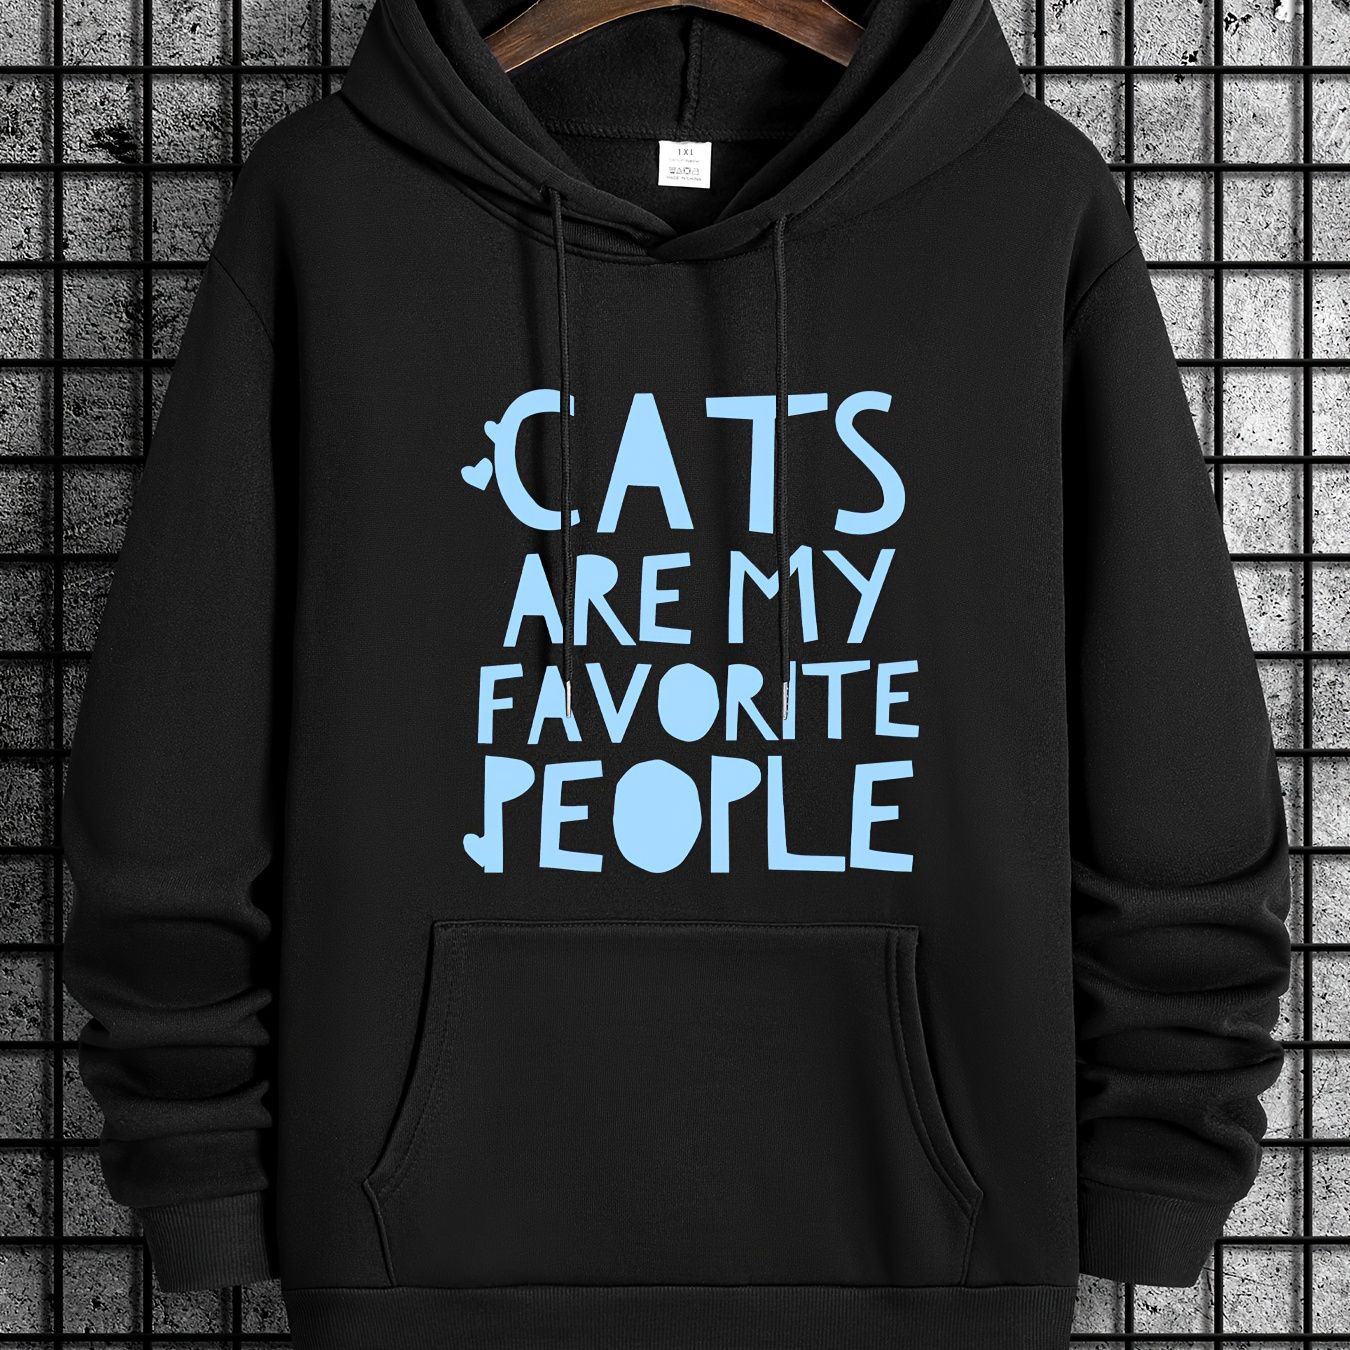 

Plus Size Men's "cats Are My Favorite People" Graphic Print Hooded Sweatshirt Hoodies Fall Winter, Men's Clothing